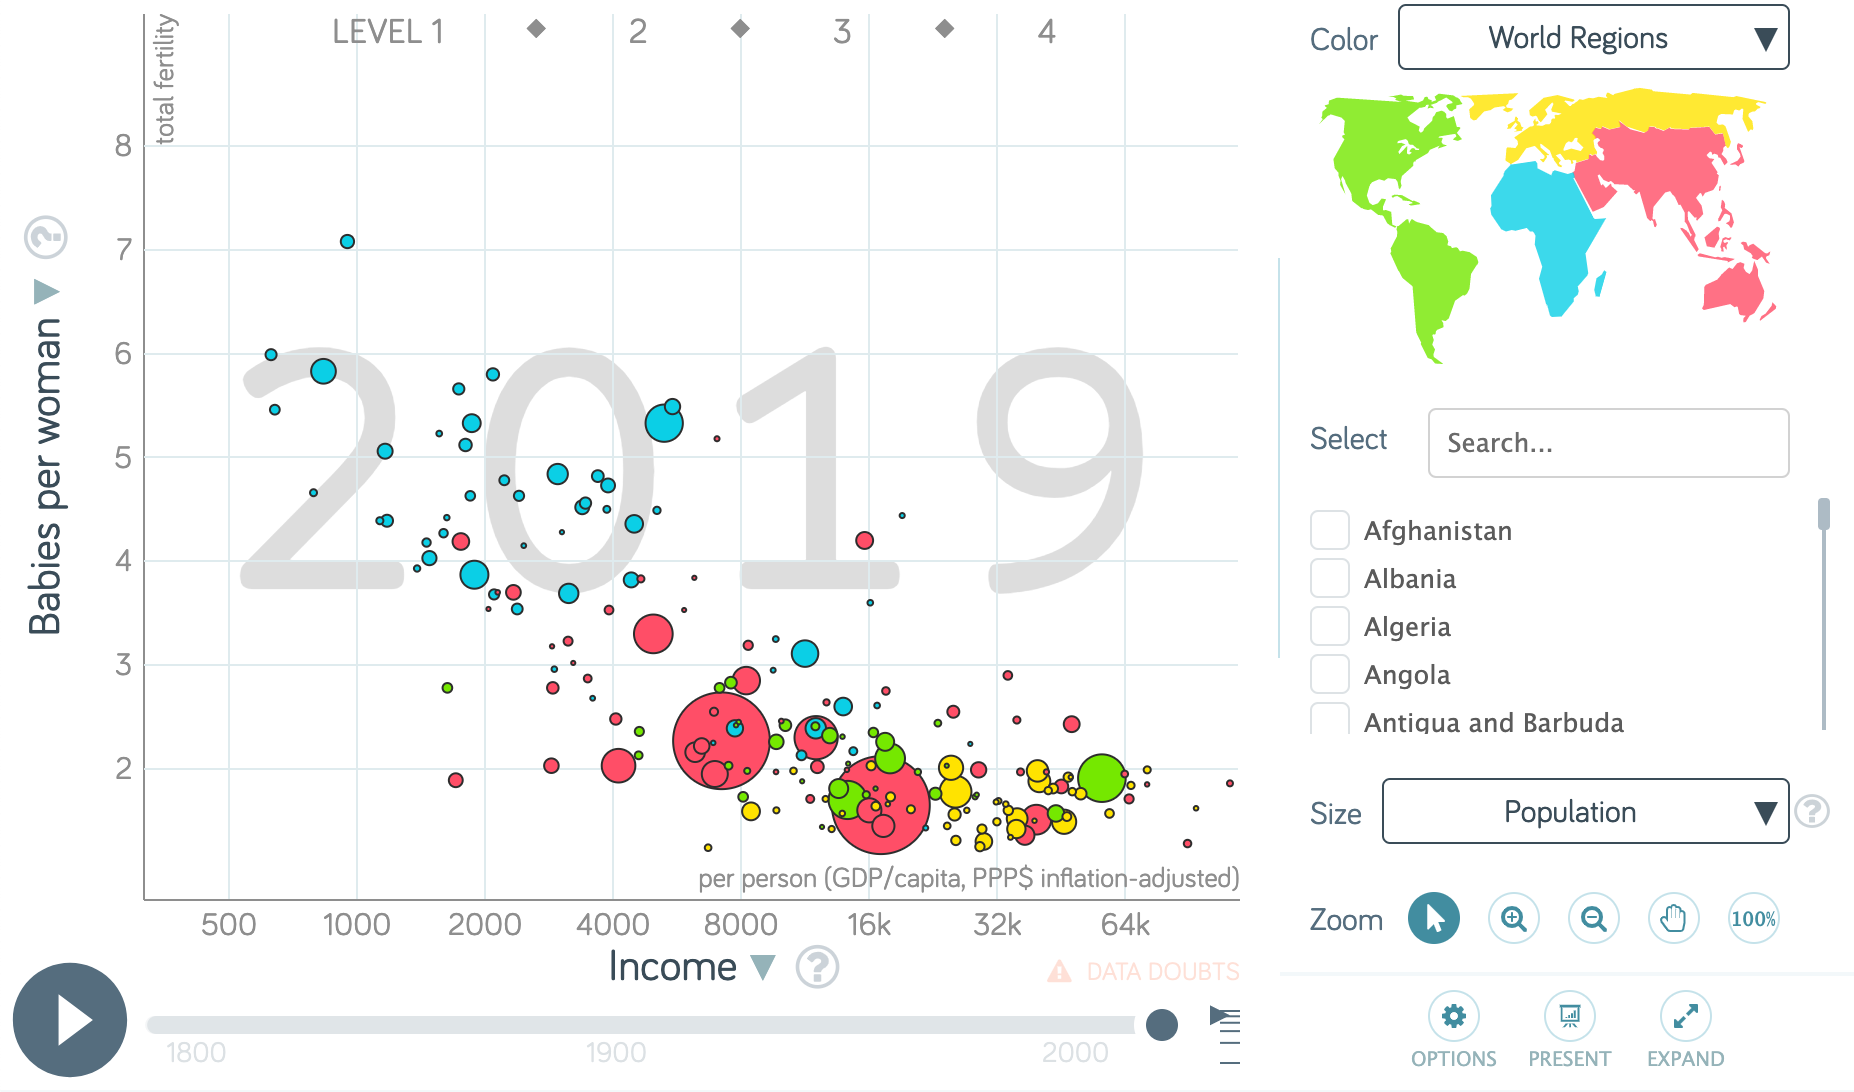 Fertility rate (babies per woman) as a function of median national income across countries. See the animated version showing how [this relationship has changed over time](https://bit.ly/3oAb0Uq). Source [gapminder.org](https://gapminder.org)